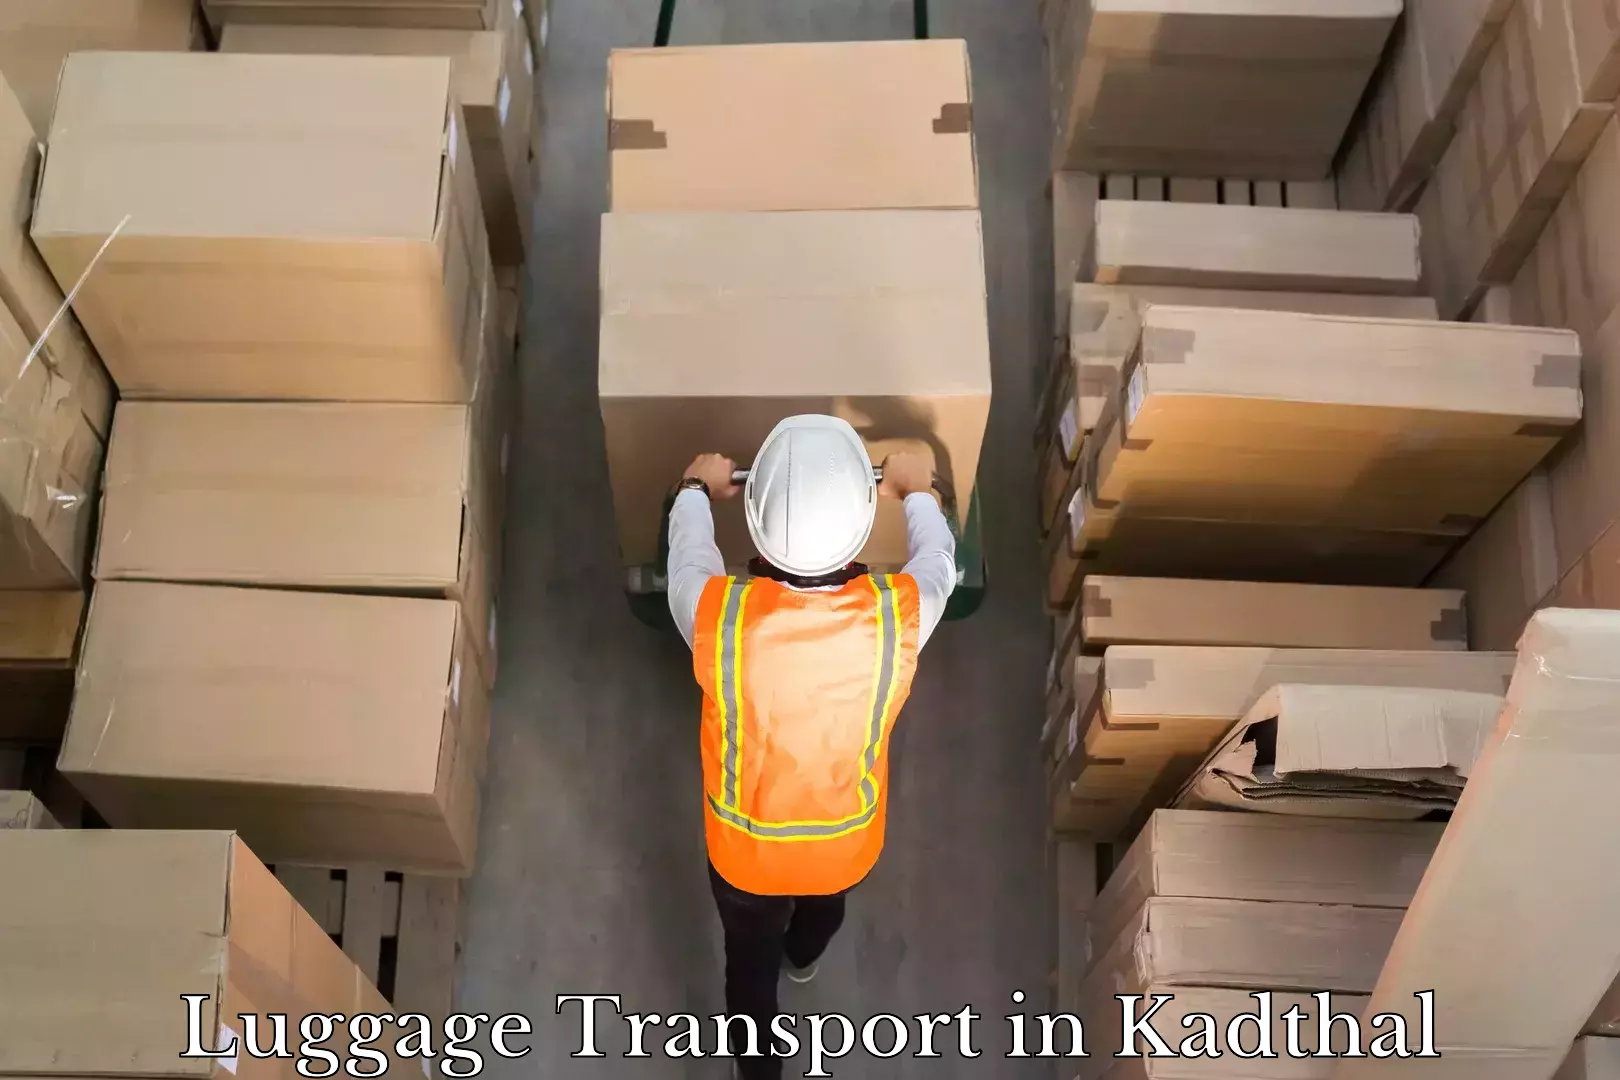 Luggage transport solutions in Kadthal